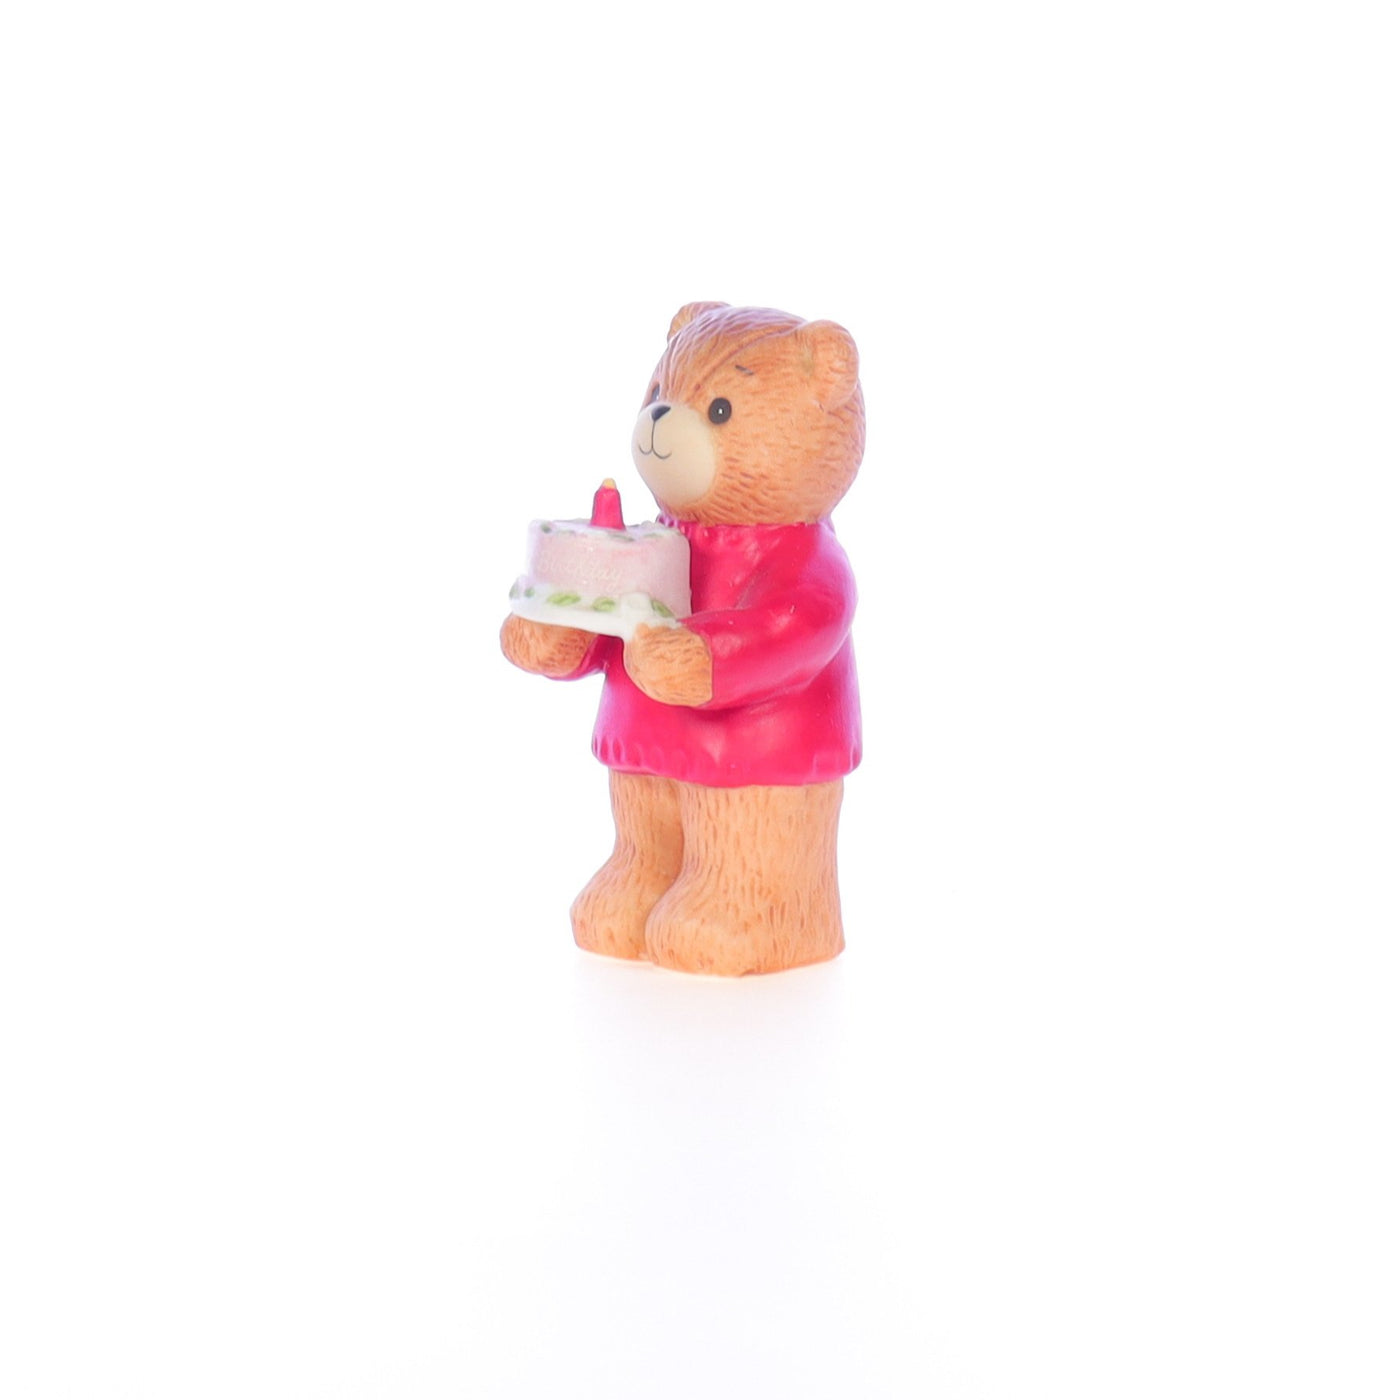 Lucy_And_Me_by_Lucy_Atwell_Porcelain_Figurine_Bear_Holding_Birthday_Cake_Age_1_Lucy_Unknown_030_02